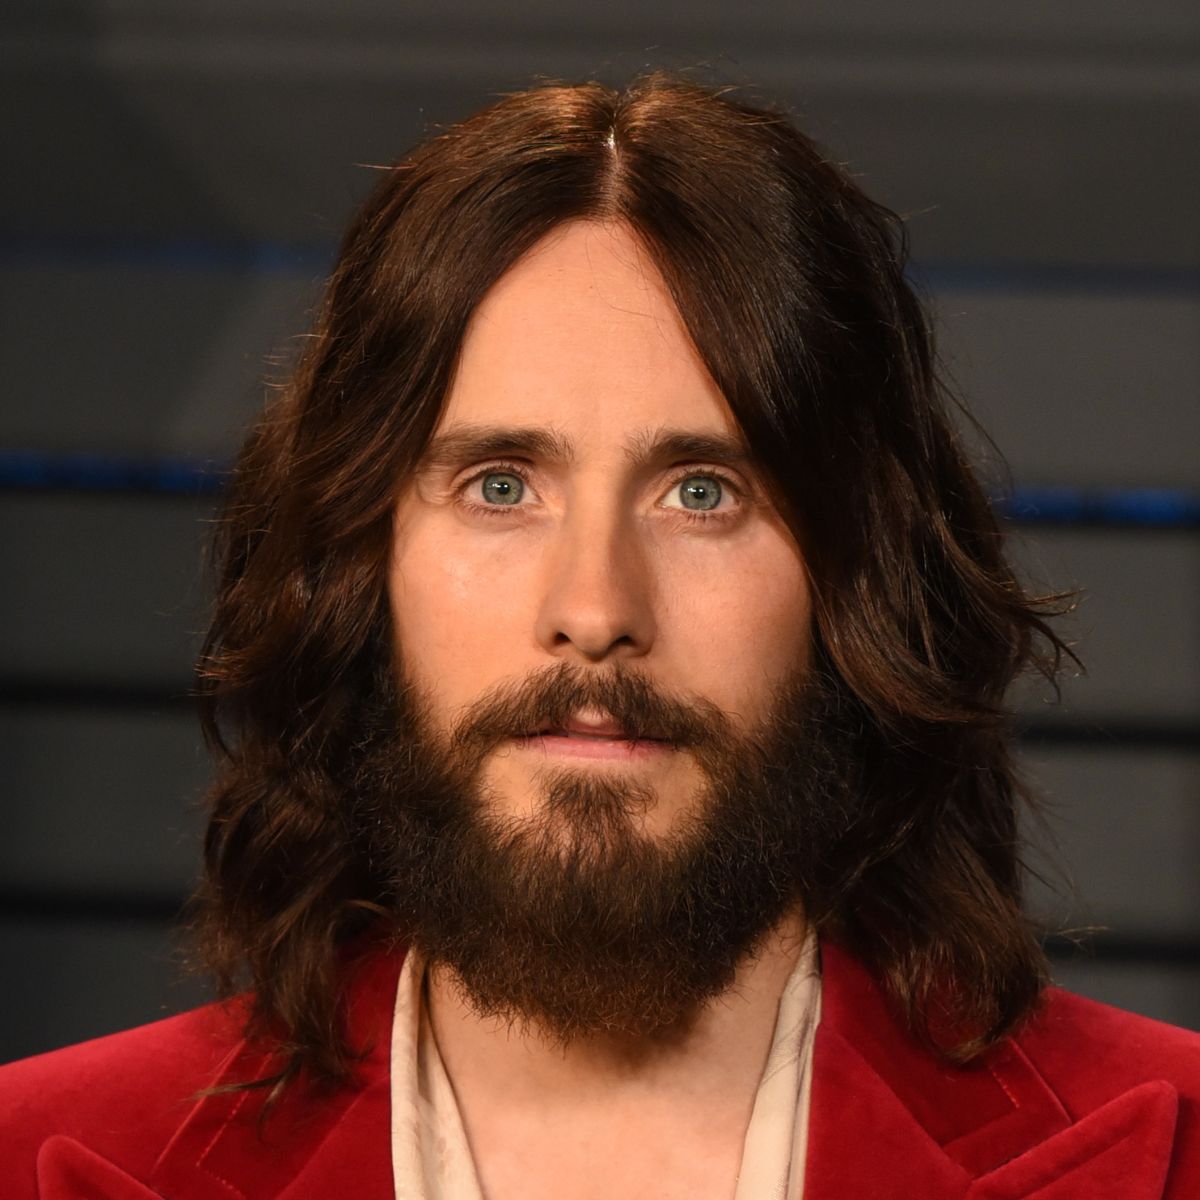 jared-leto-2019-hairstyle-haircut-man-for-himself-ft.jpg